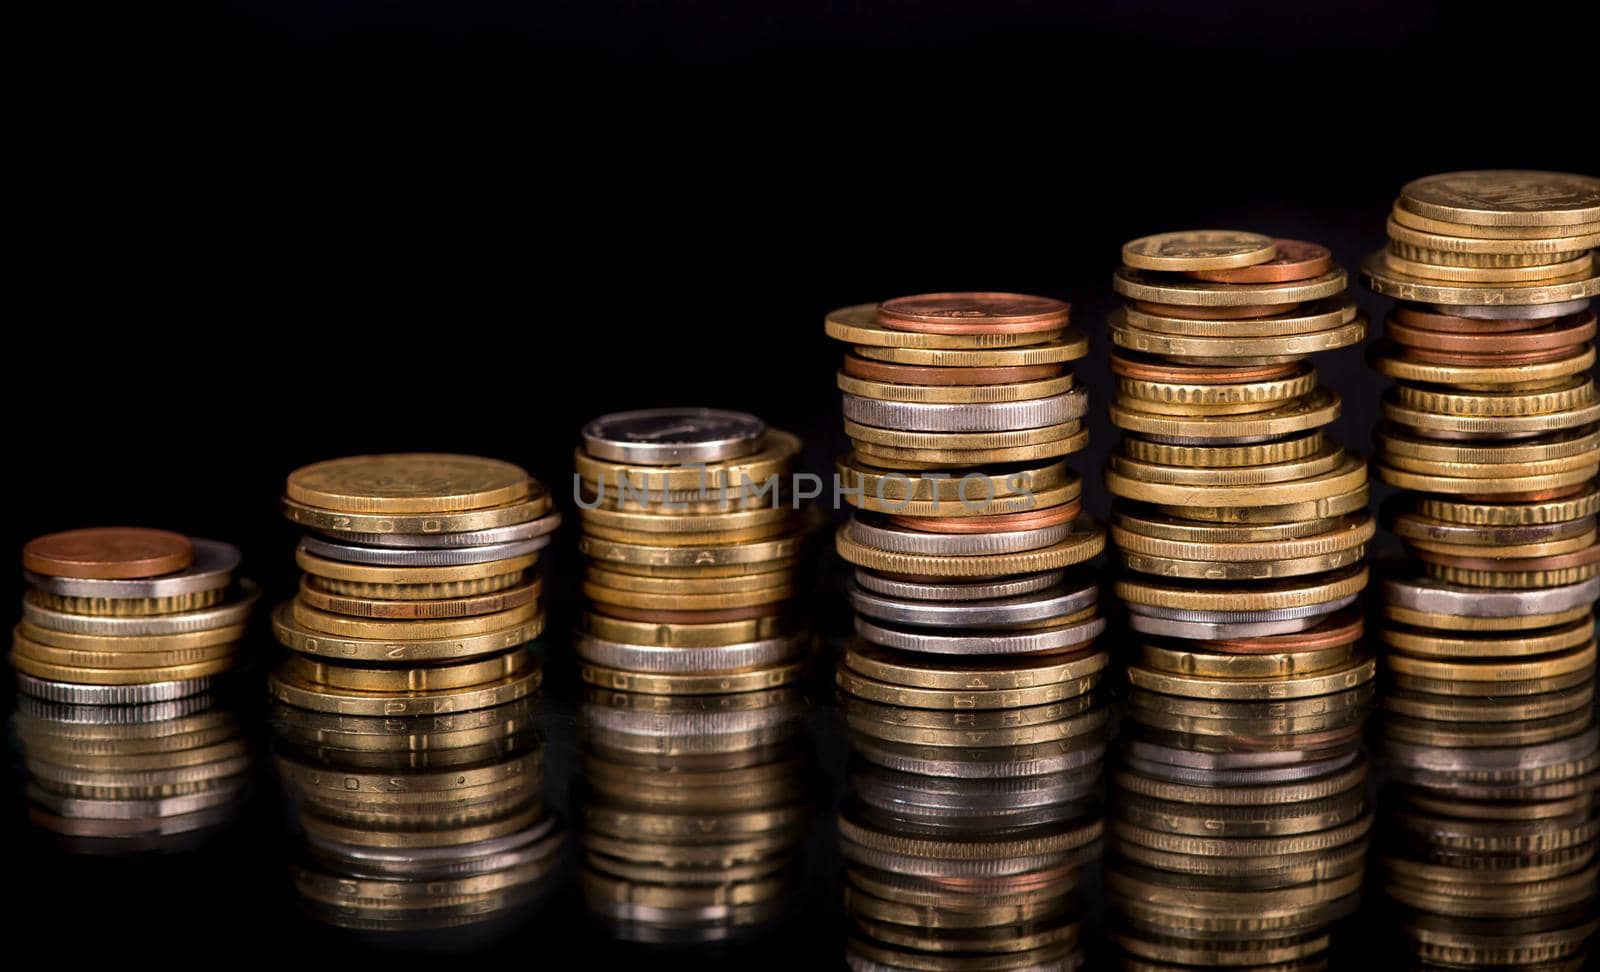 Stacks cf different country coins on black background.